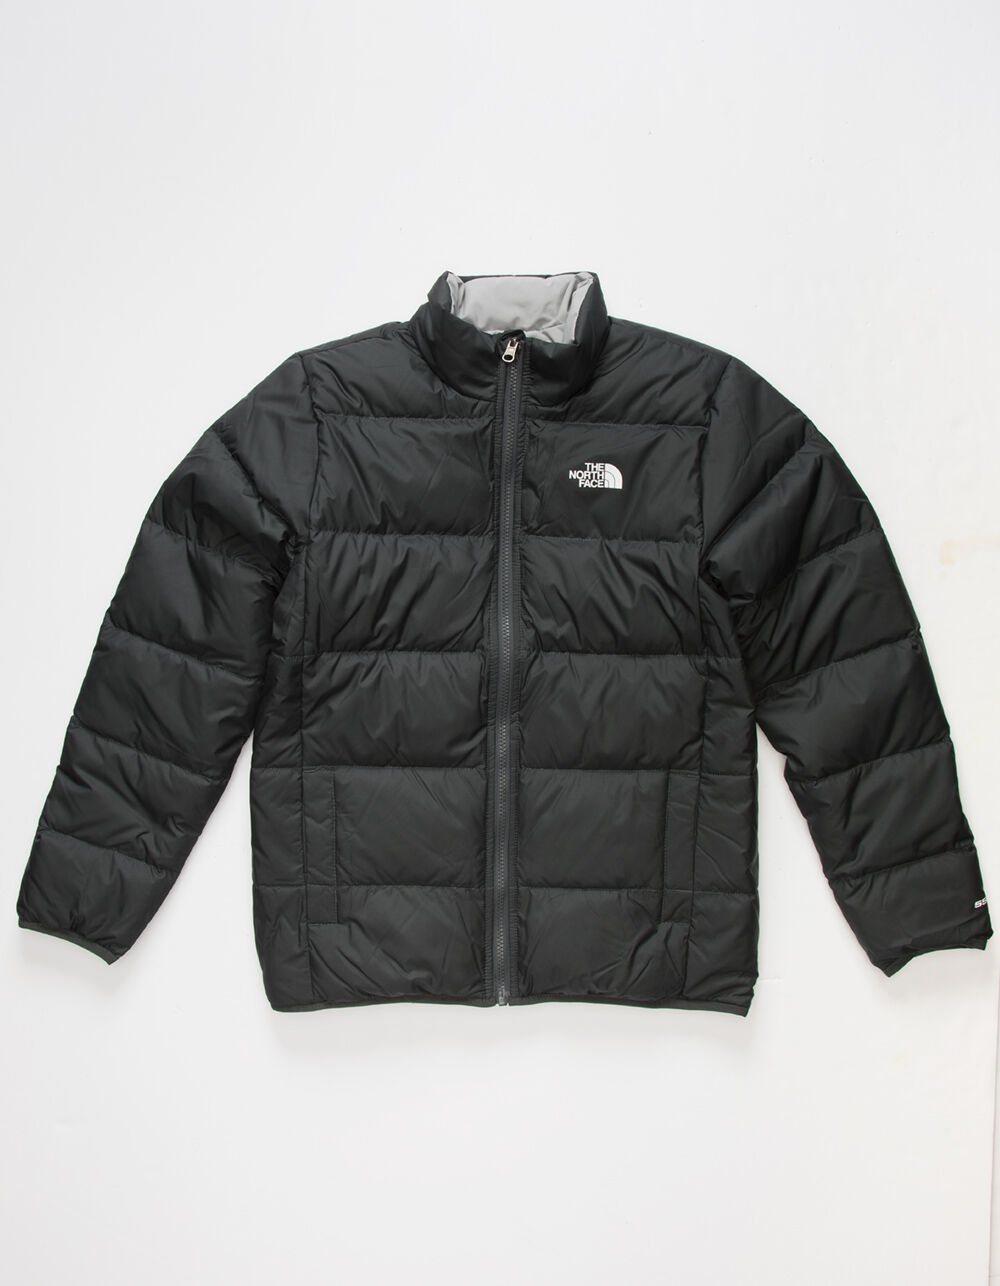 THE NORTH FACE Reversible Andes Boys Jacket - CEMENT | Tillys